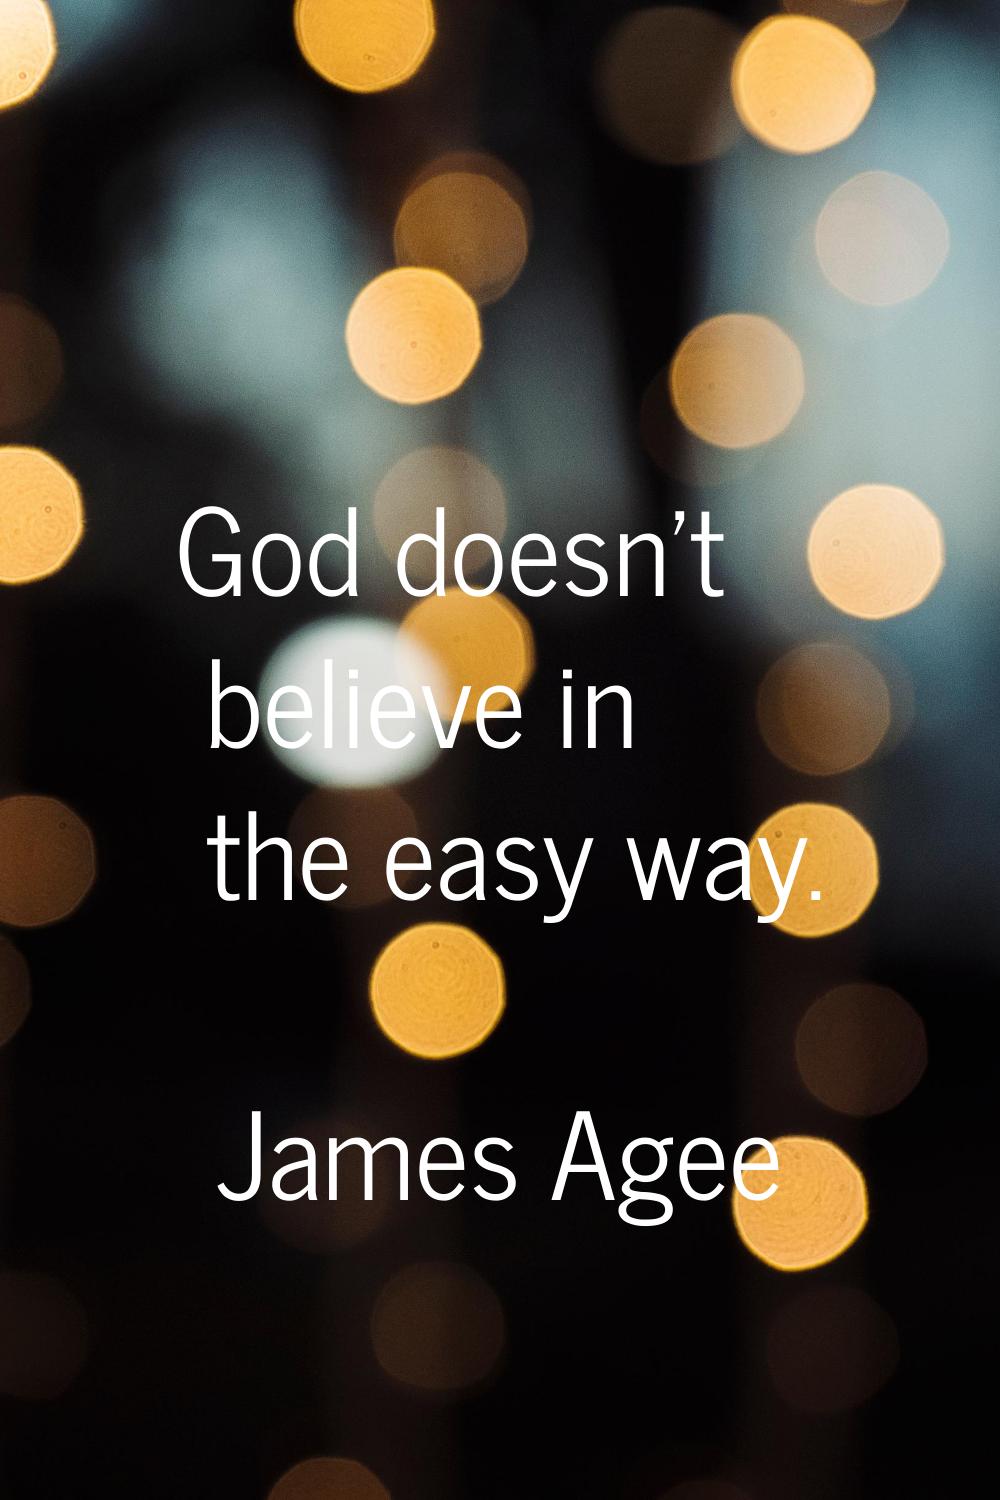 God doesn't believe in the easy way.